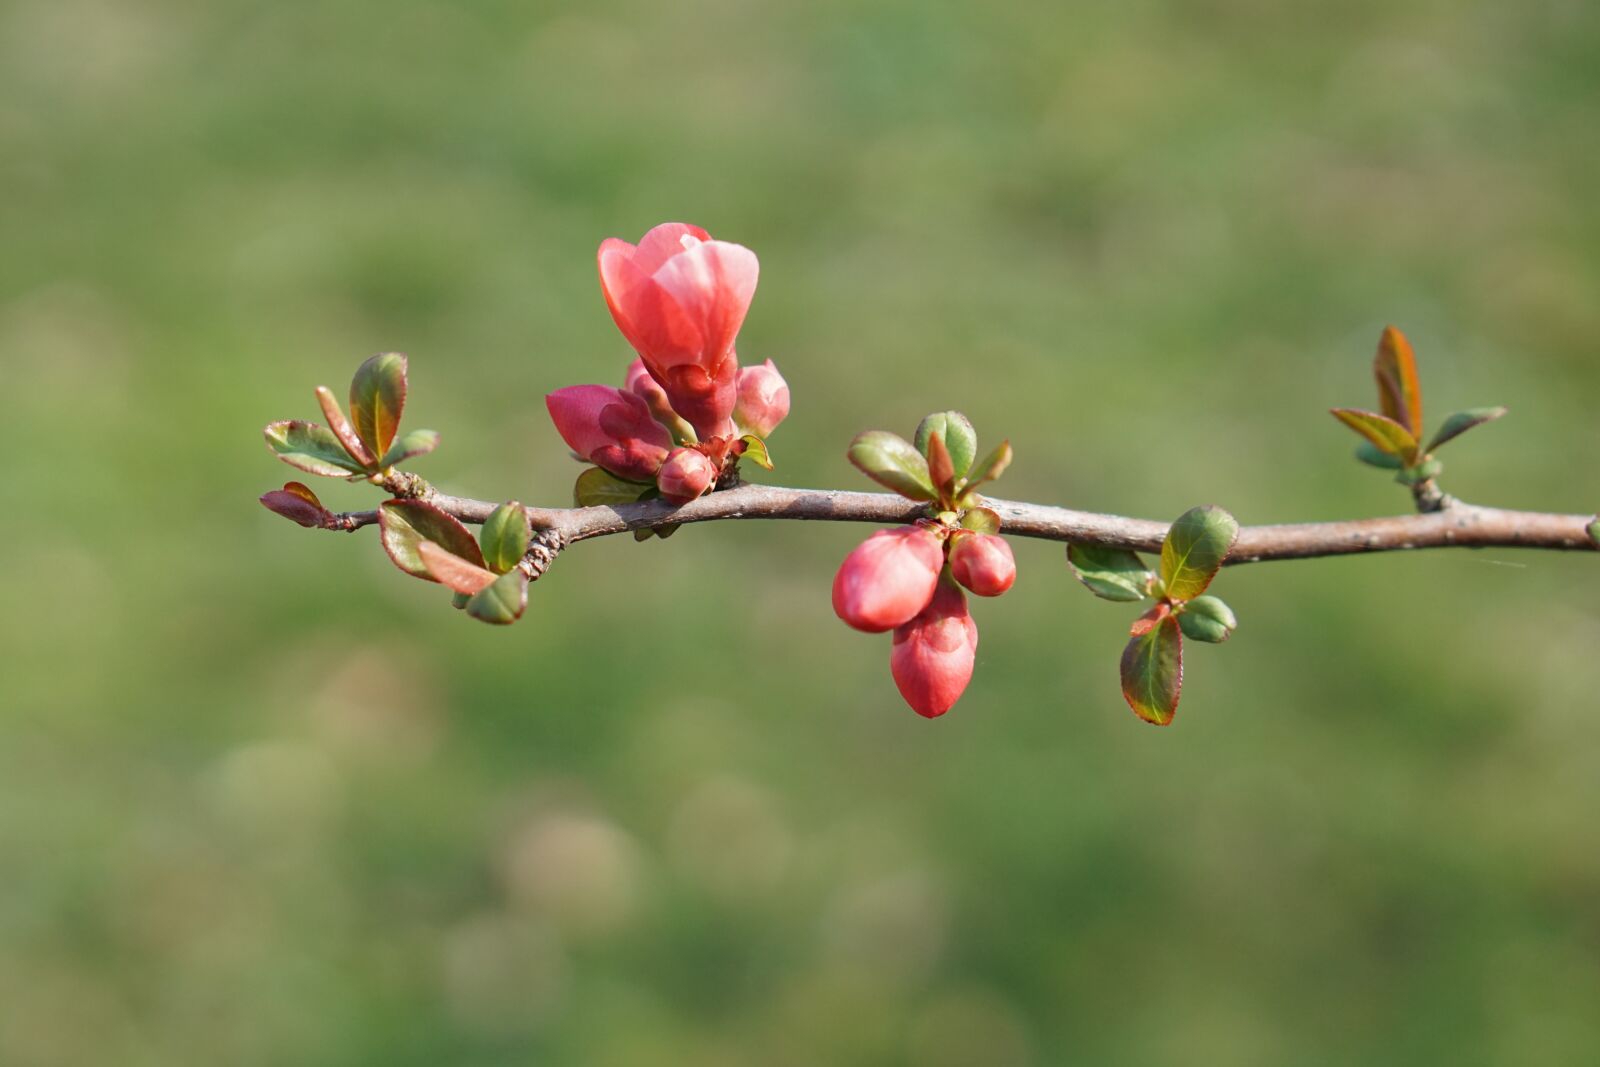 Sony a5100 sample photo. Spring, bud, nature photography